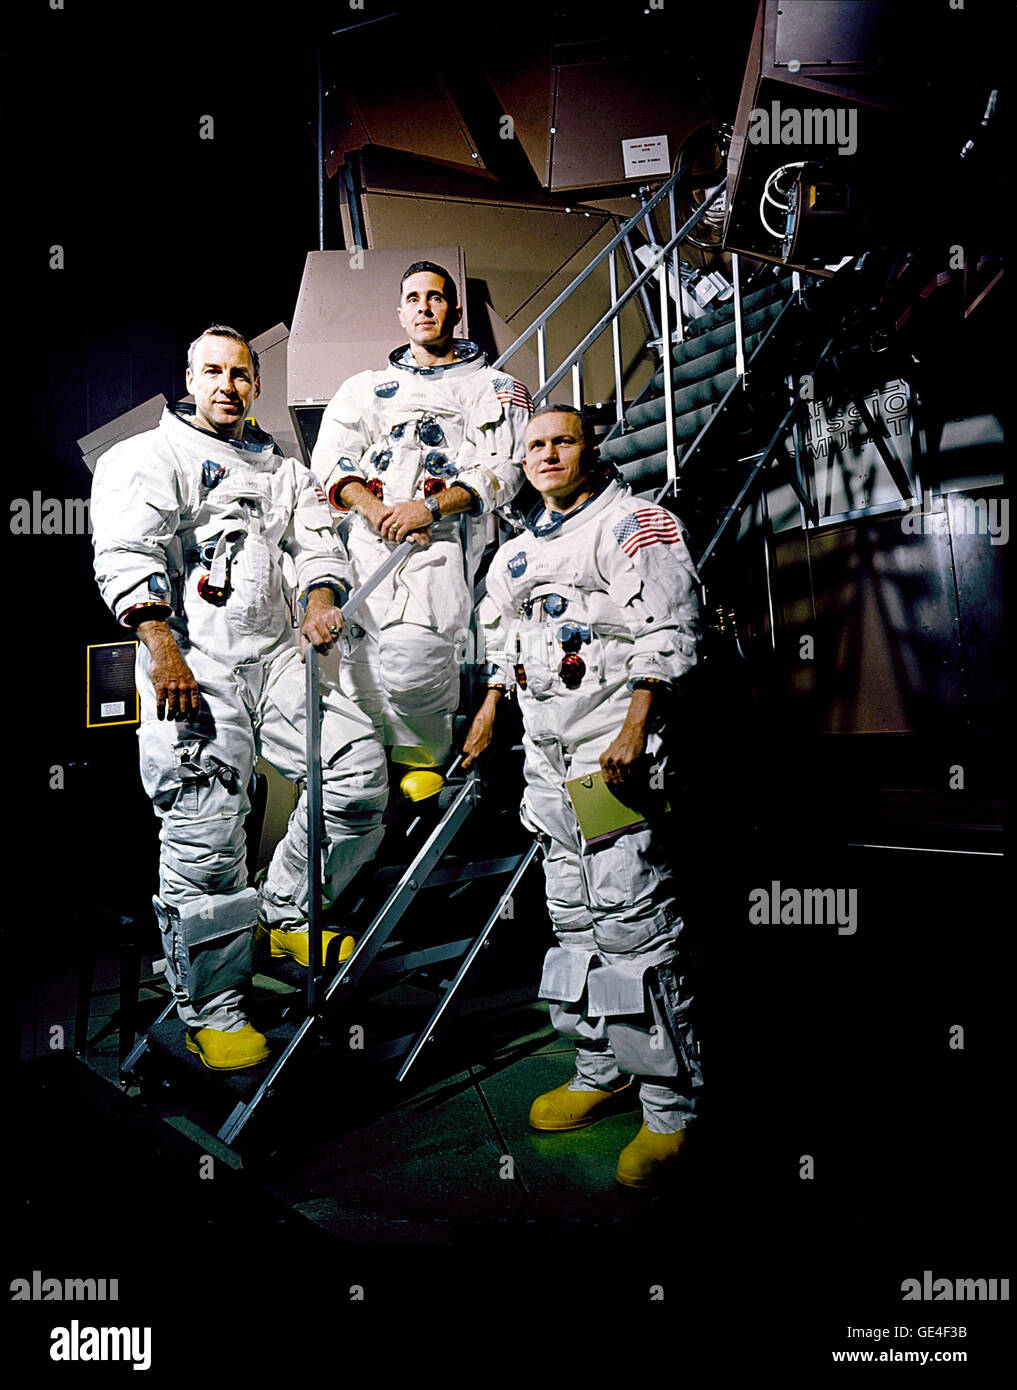 (November 22, 1968) Apollo 8 crew is photographed posing on a Kennedy Space Center (KSC) simulator in their space suits. From left to right are: James A. Lovell Jr., William A. Anders, and Frank Borman.  Image # : S68-50265 Stock Photo